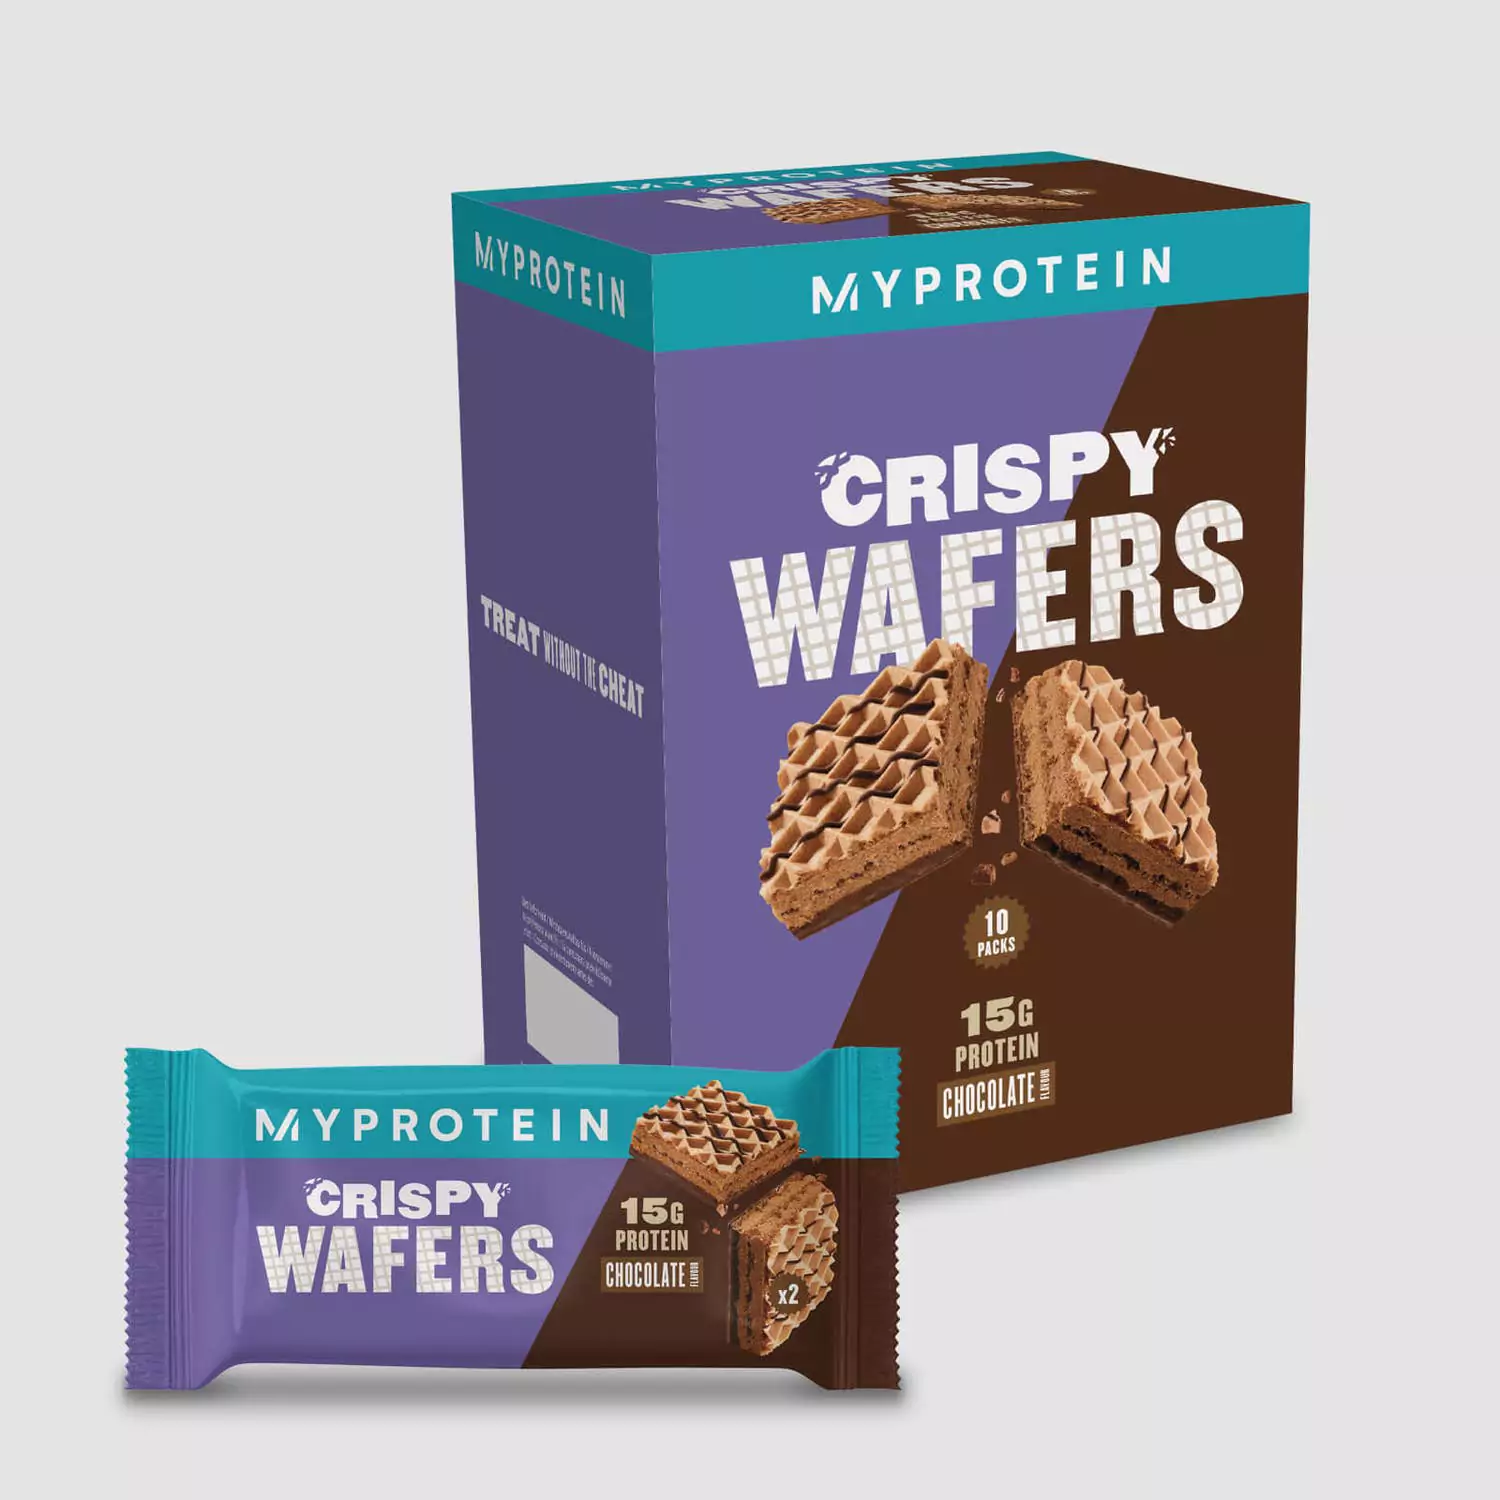 Myprotein Crispy Wafers 10 Bar Pack Discounts and Cashback